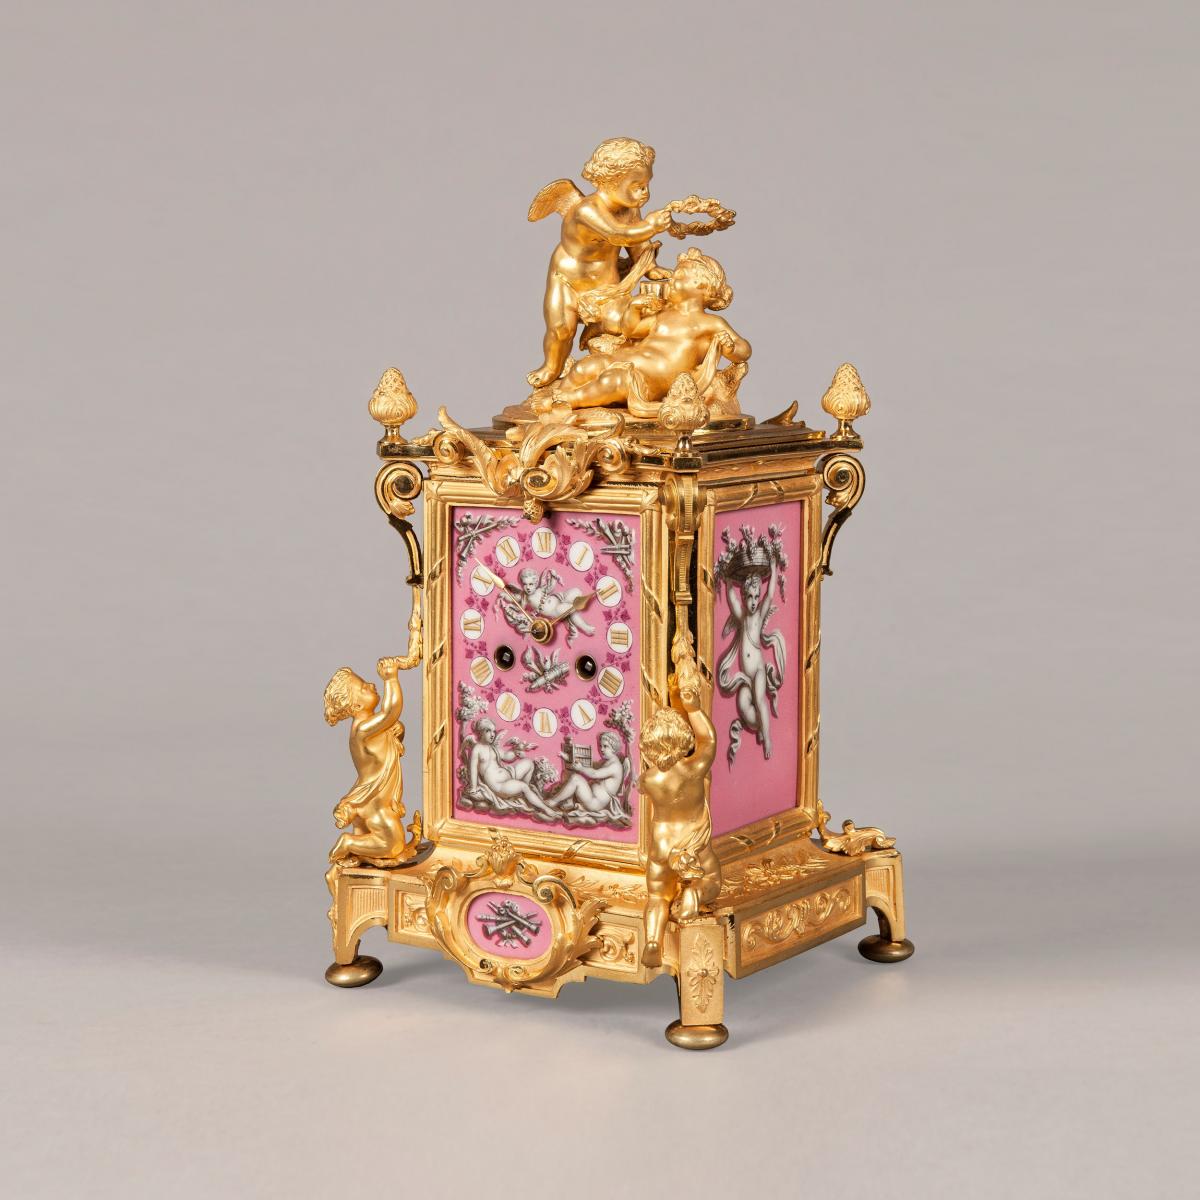 French Ormolu Carriage Clock in the Louis XV Manner